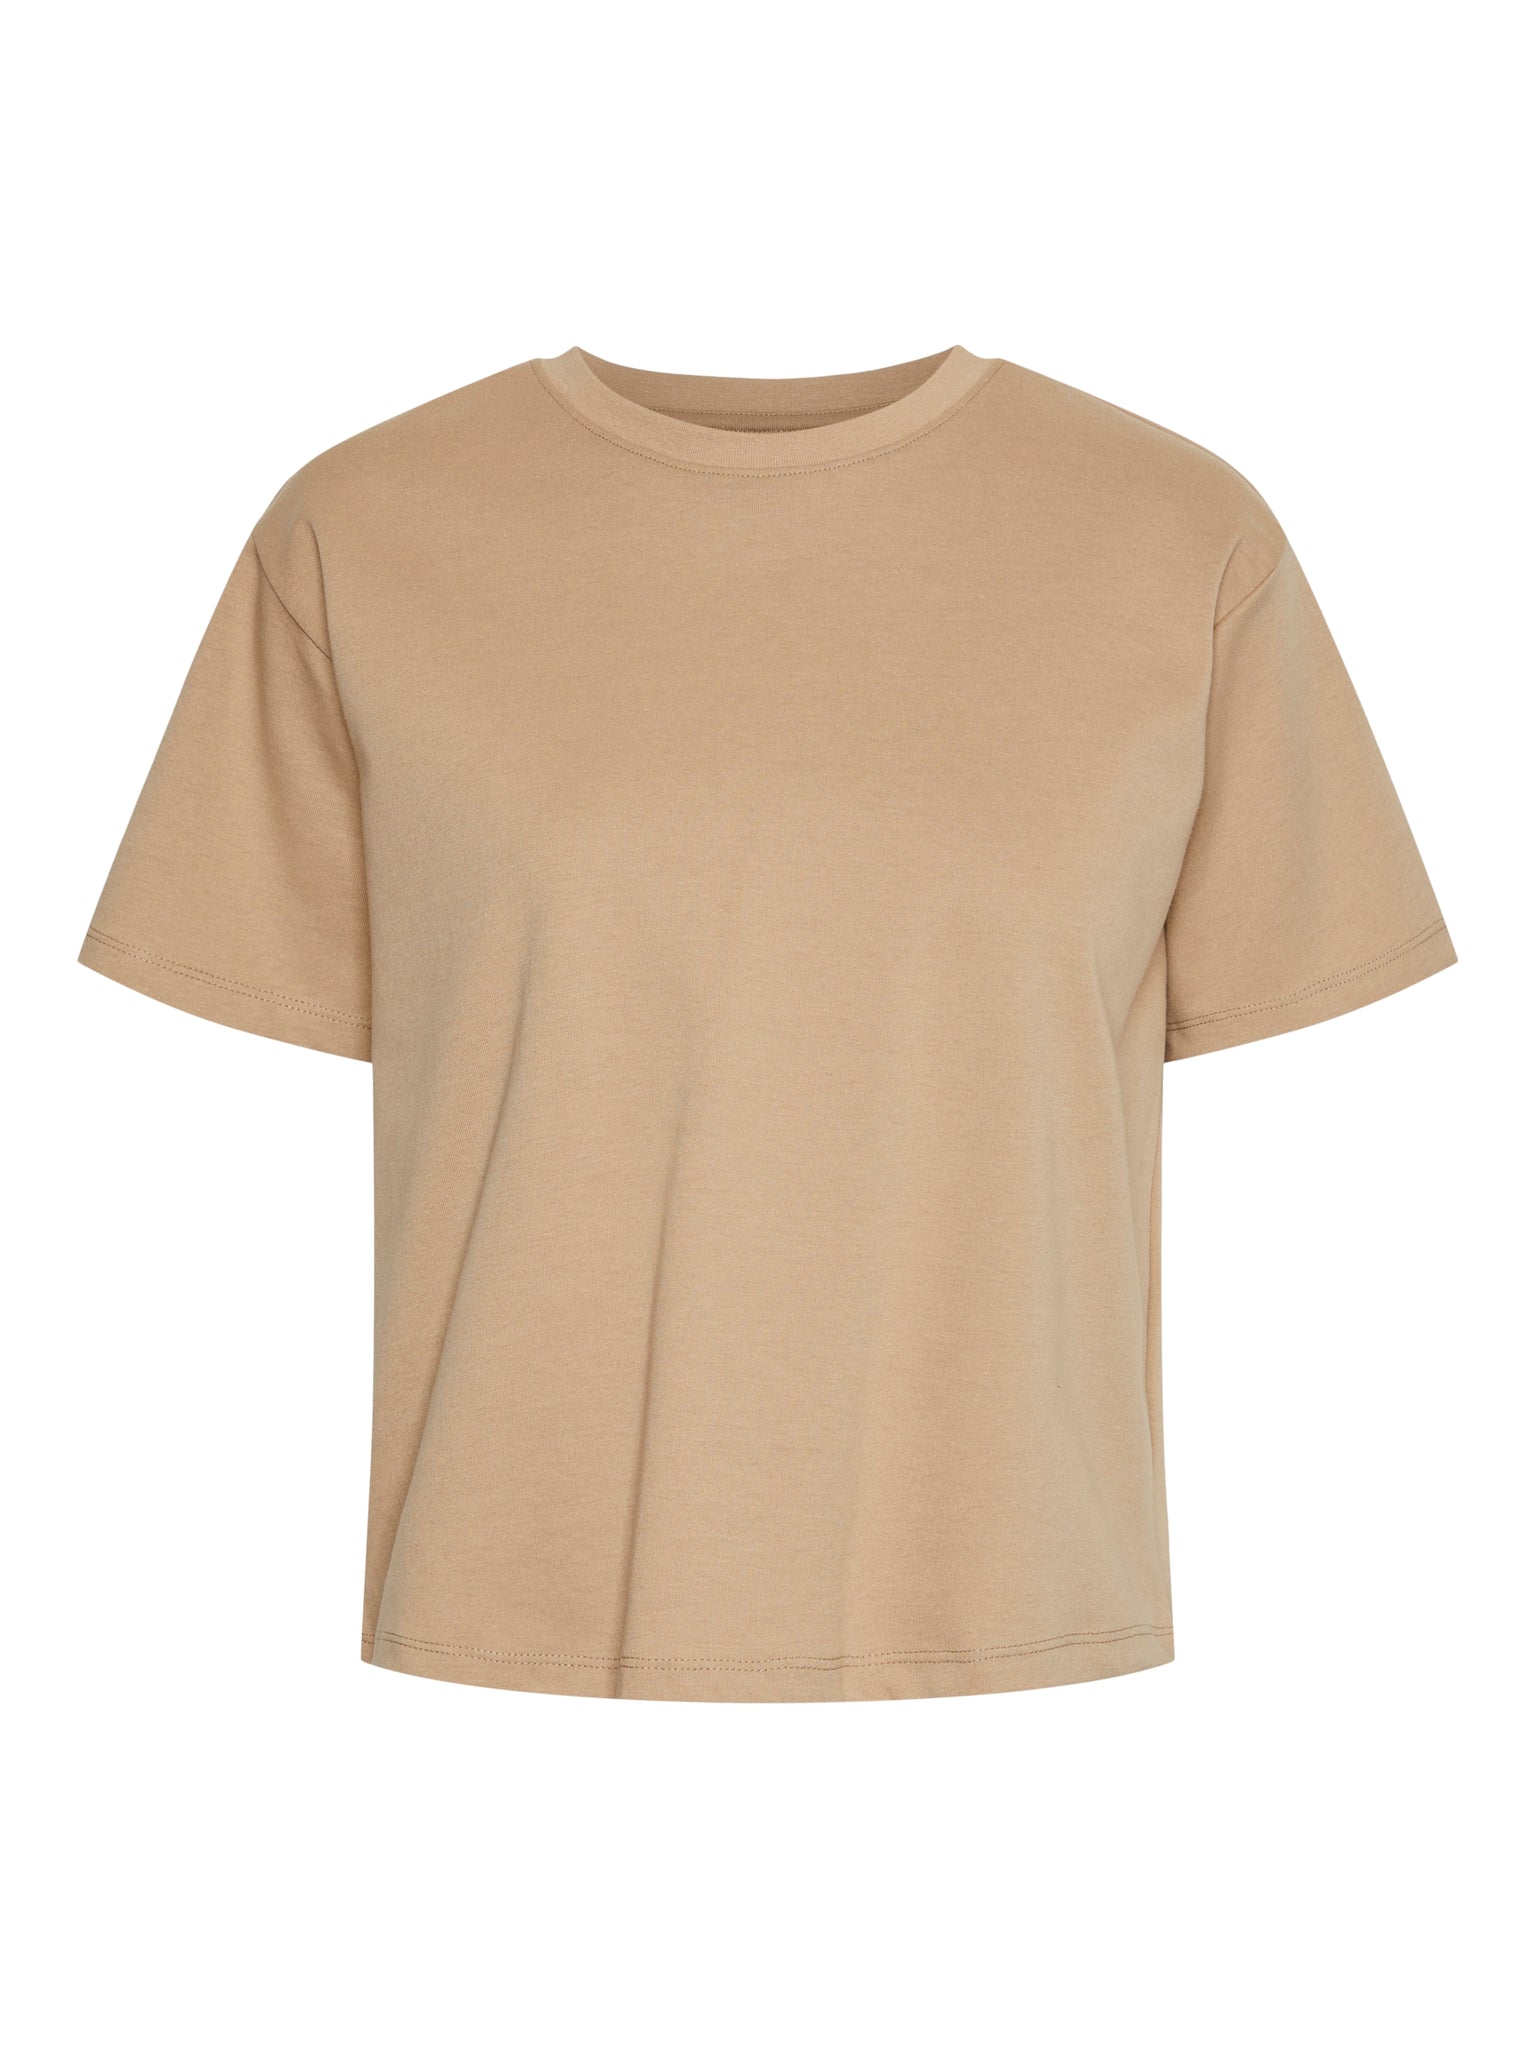 Pieces Boxy T-Shirt in Beige